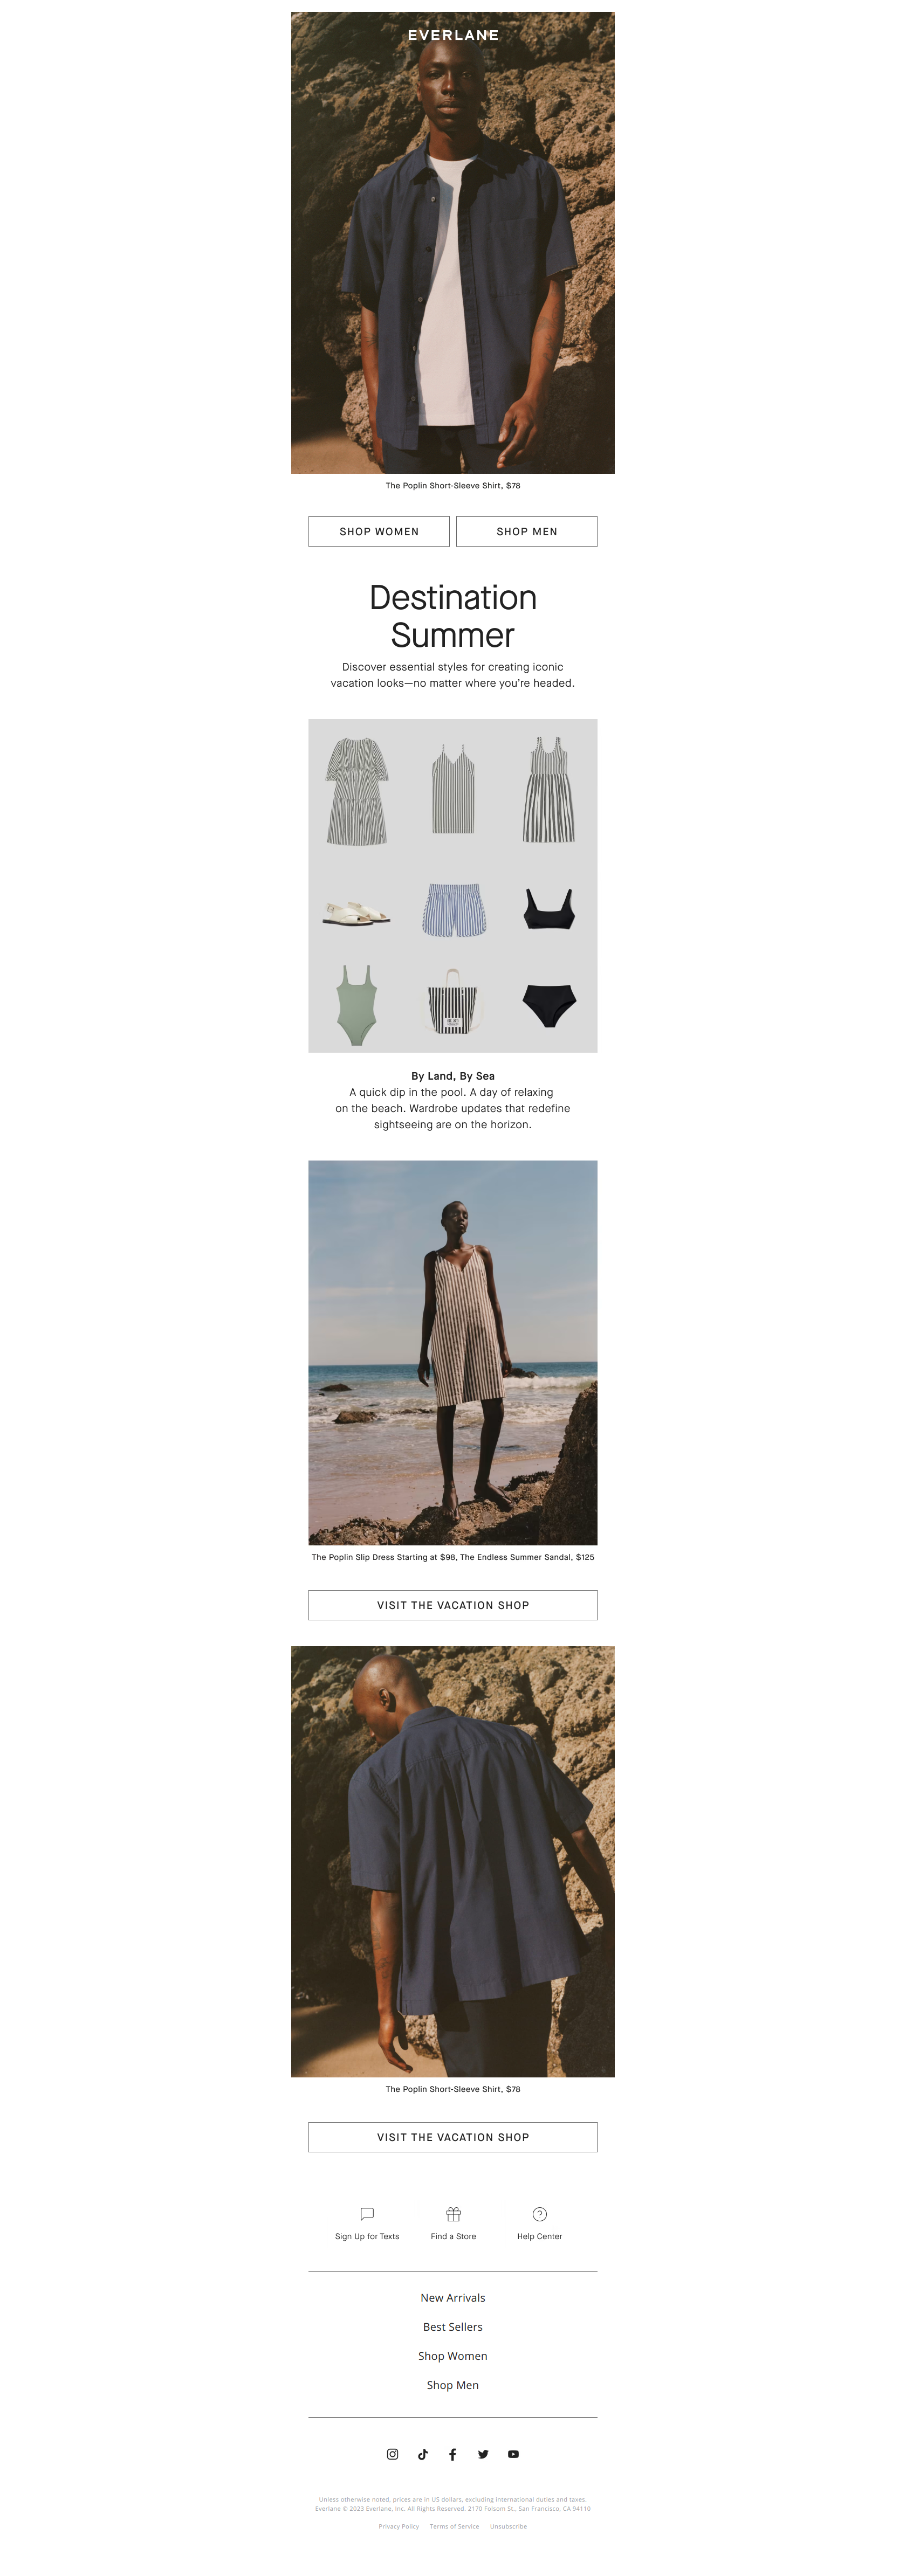 Your Vacation Style Awaits - Everlane Newsletter